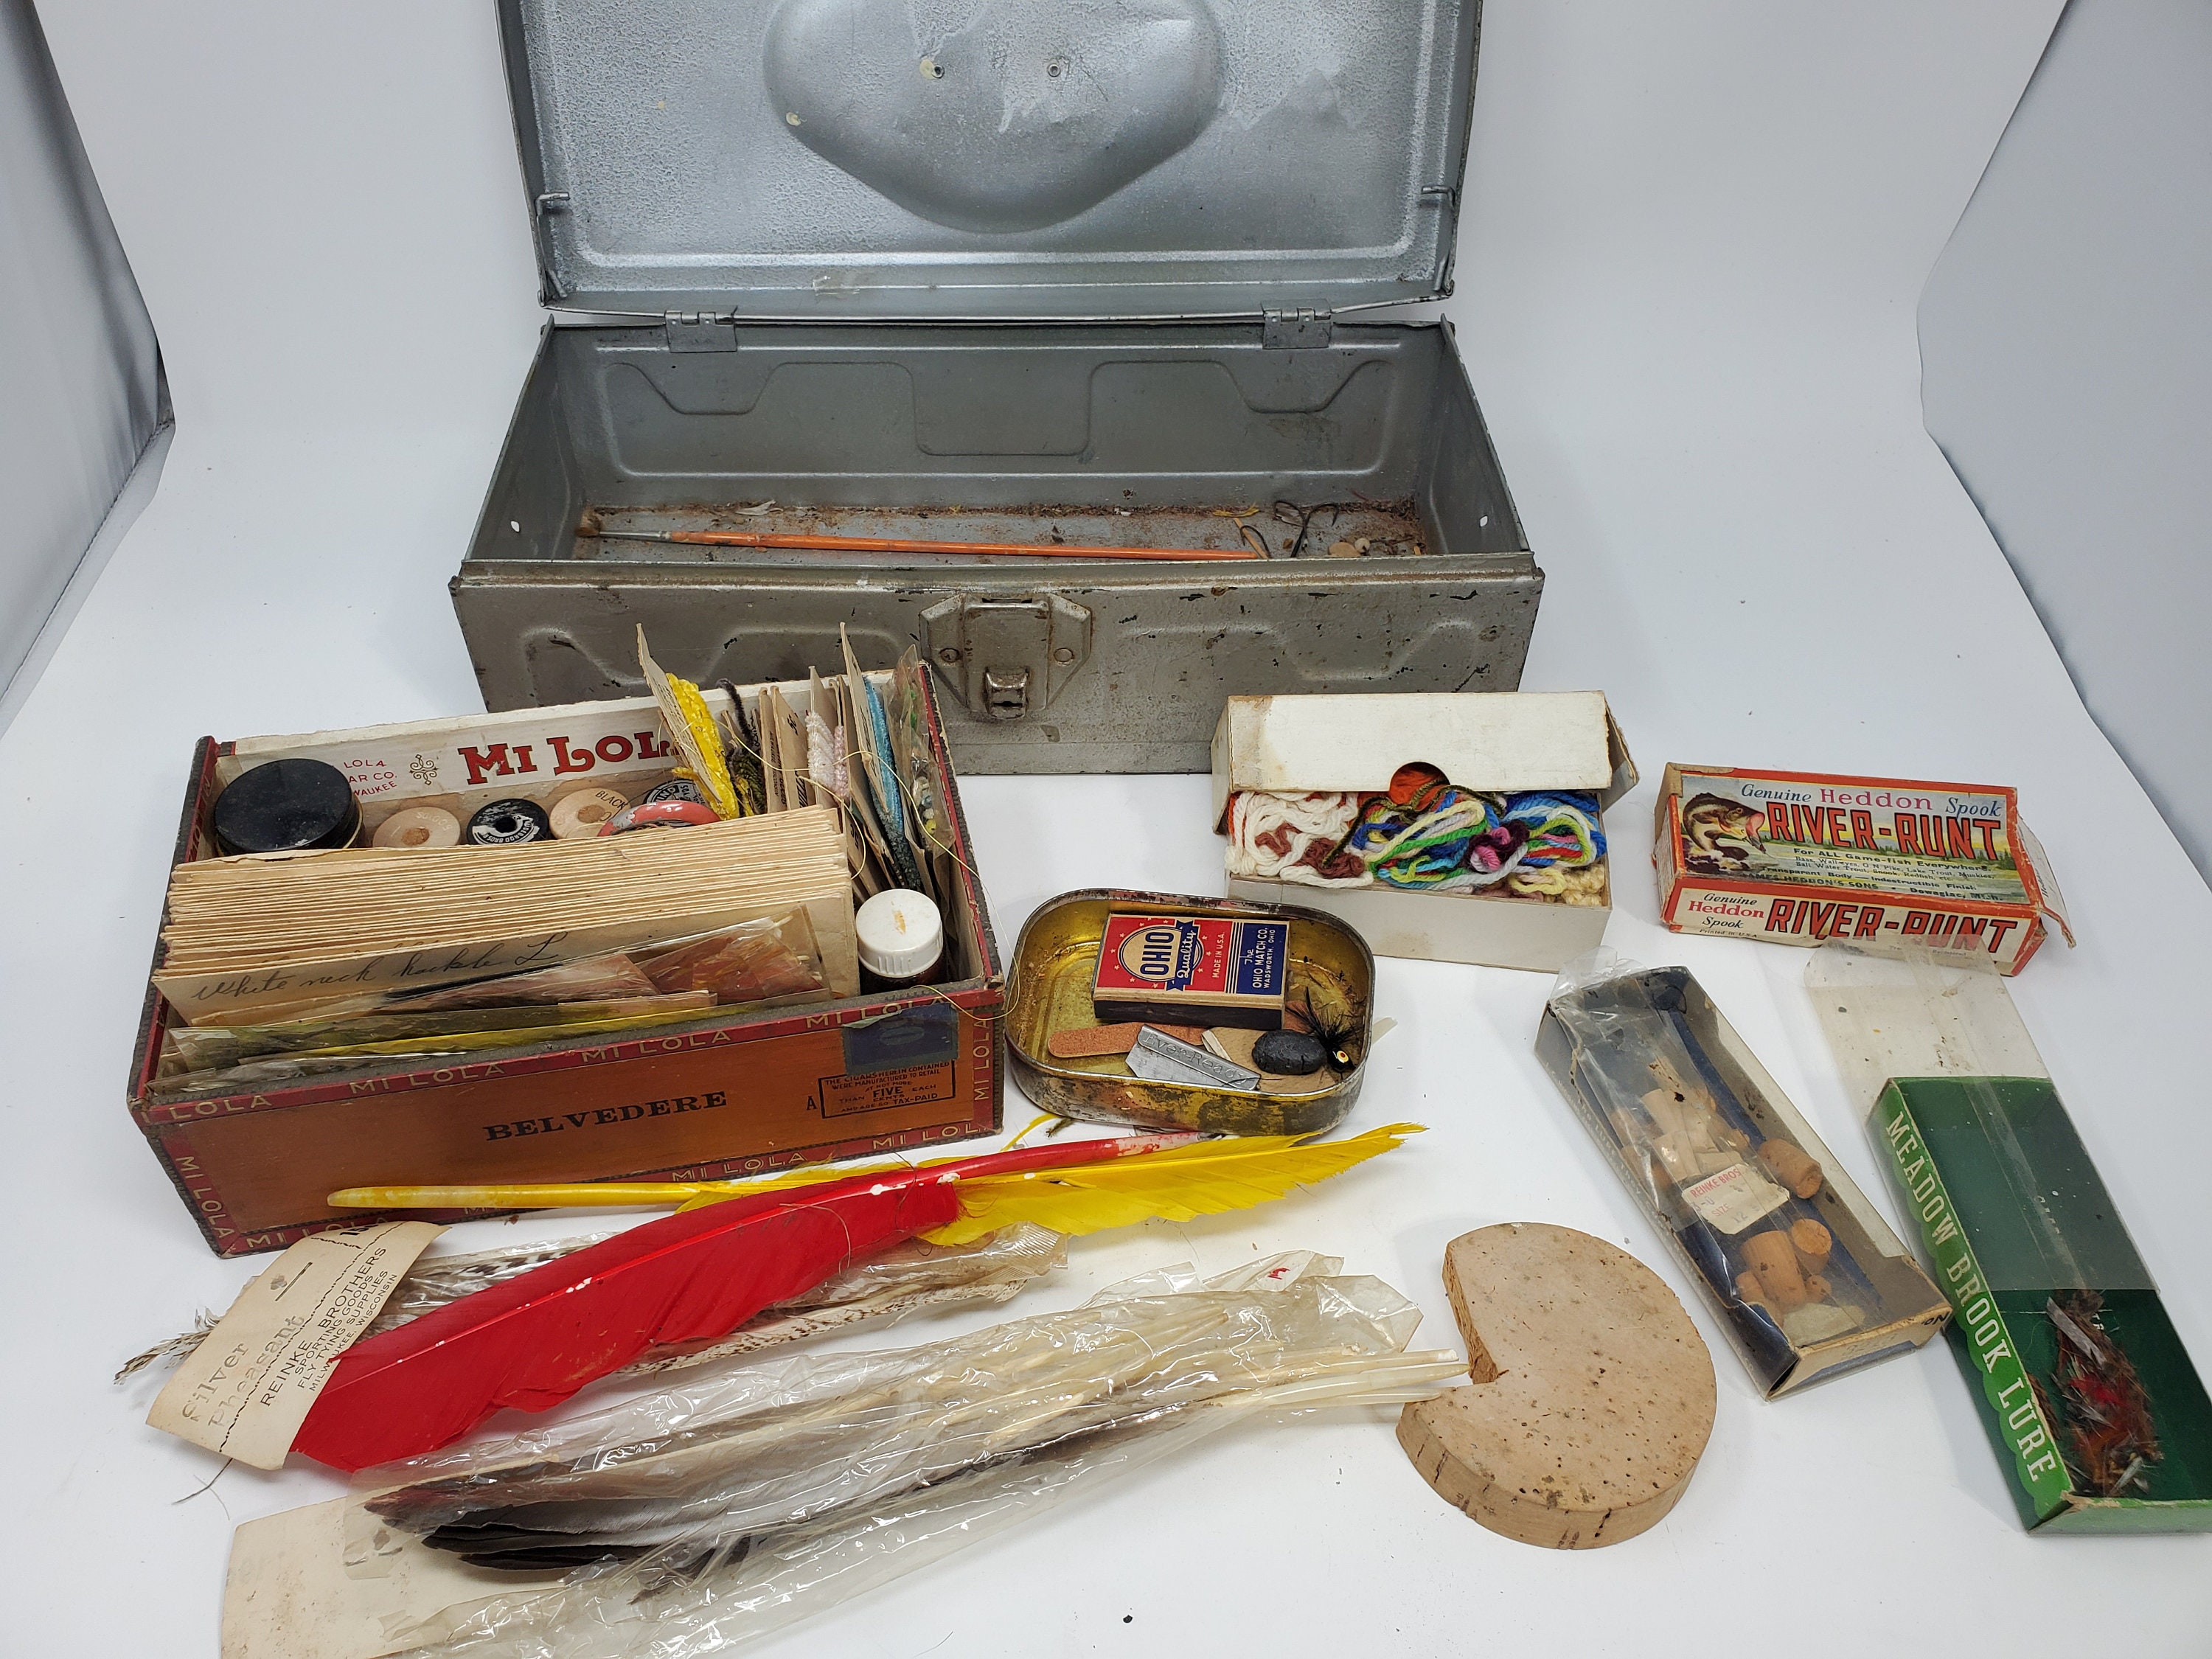 Vintage Old Fly Fishing Lurer Making Kit, Fishing, Tackle Box, Fly Fishing,  Old Advertising, Repurpose Décor, Crafts, Feathers, Northwoods -  New  Zealand